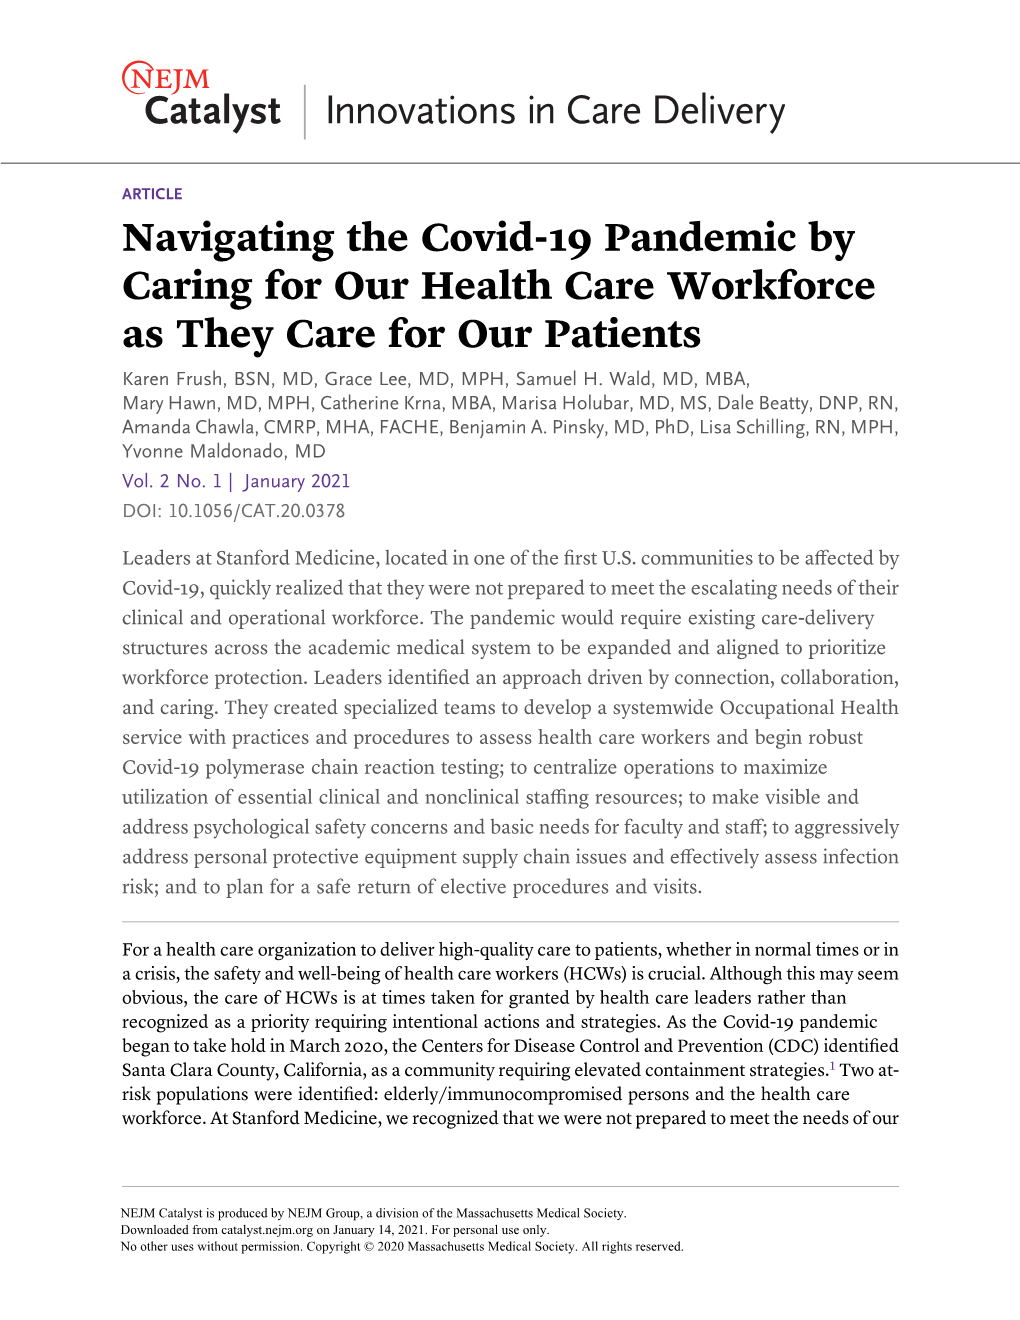 Navigating the Covid-19 Pandemic by Caring for Our Health Care Workforce As They Care for Our Patients Karen Frush, BSN, MD, Grace Lee, MD, MPH, Samuel H